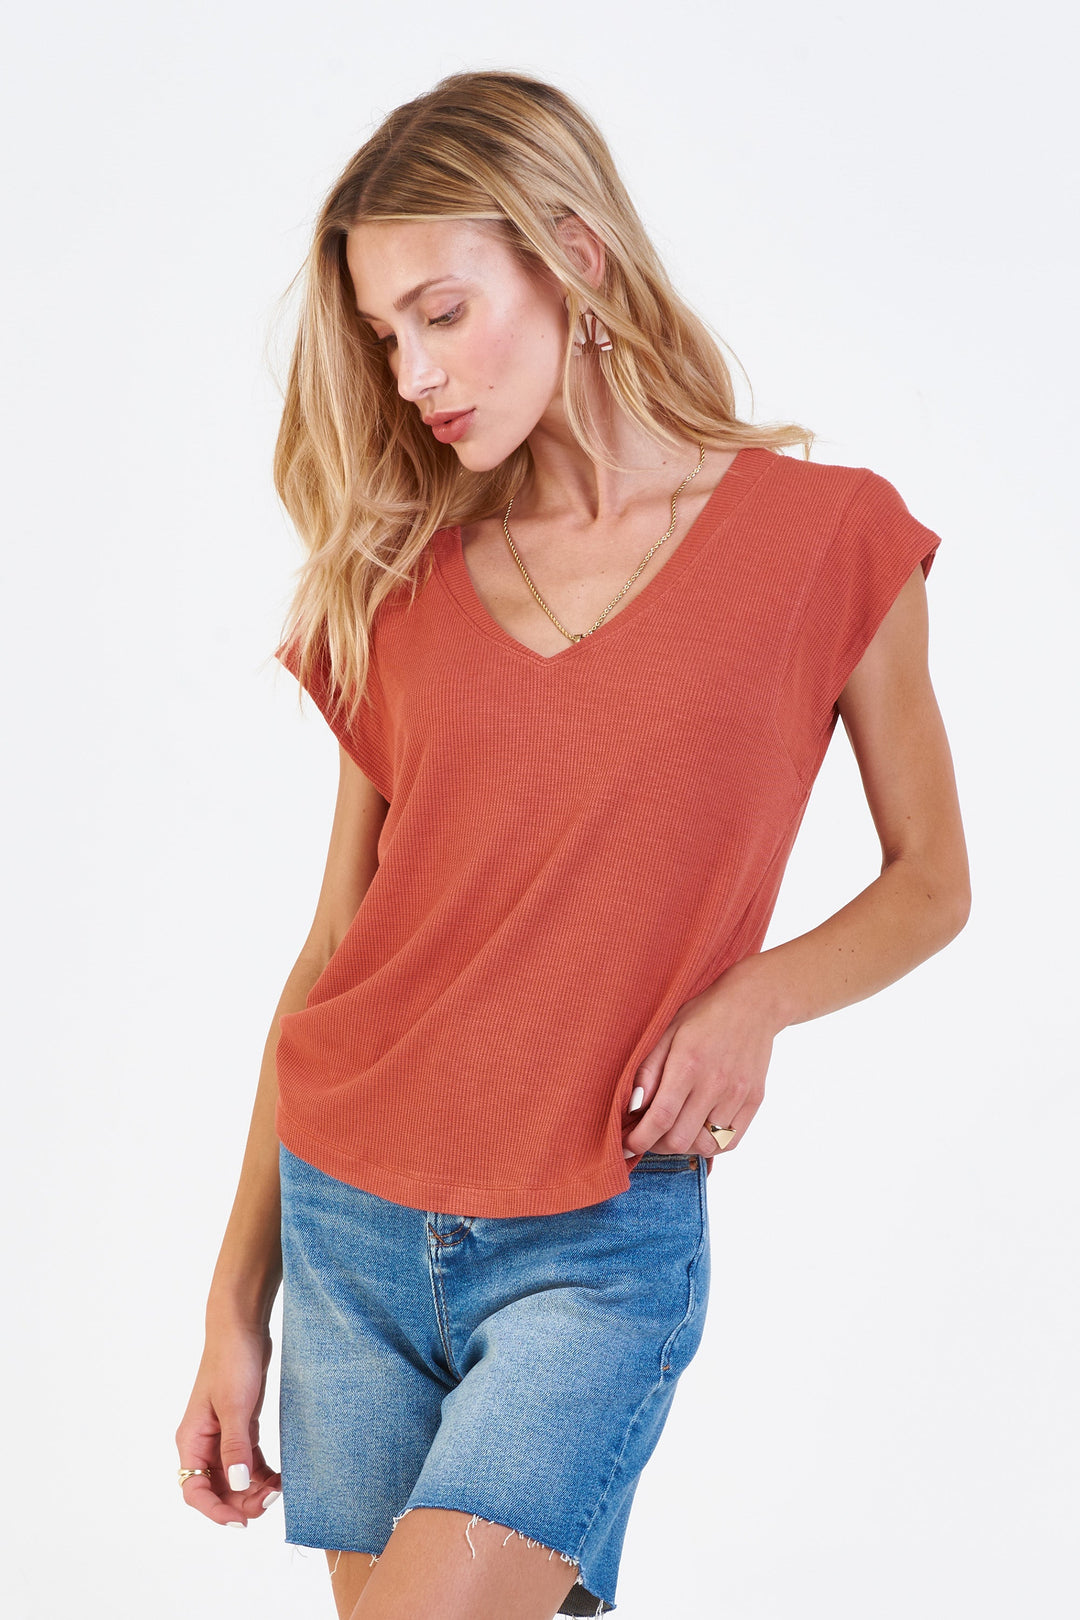 image of a female model wearing a URI THERMAL V-NECK TOP RED CLAY DEAR JOHN DENIM 